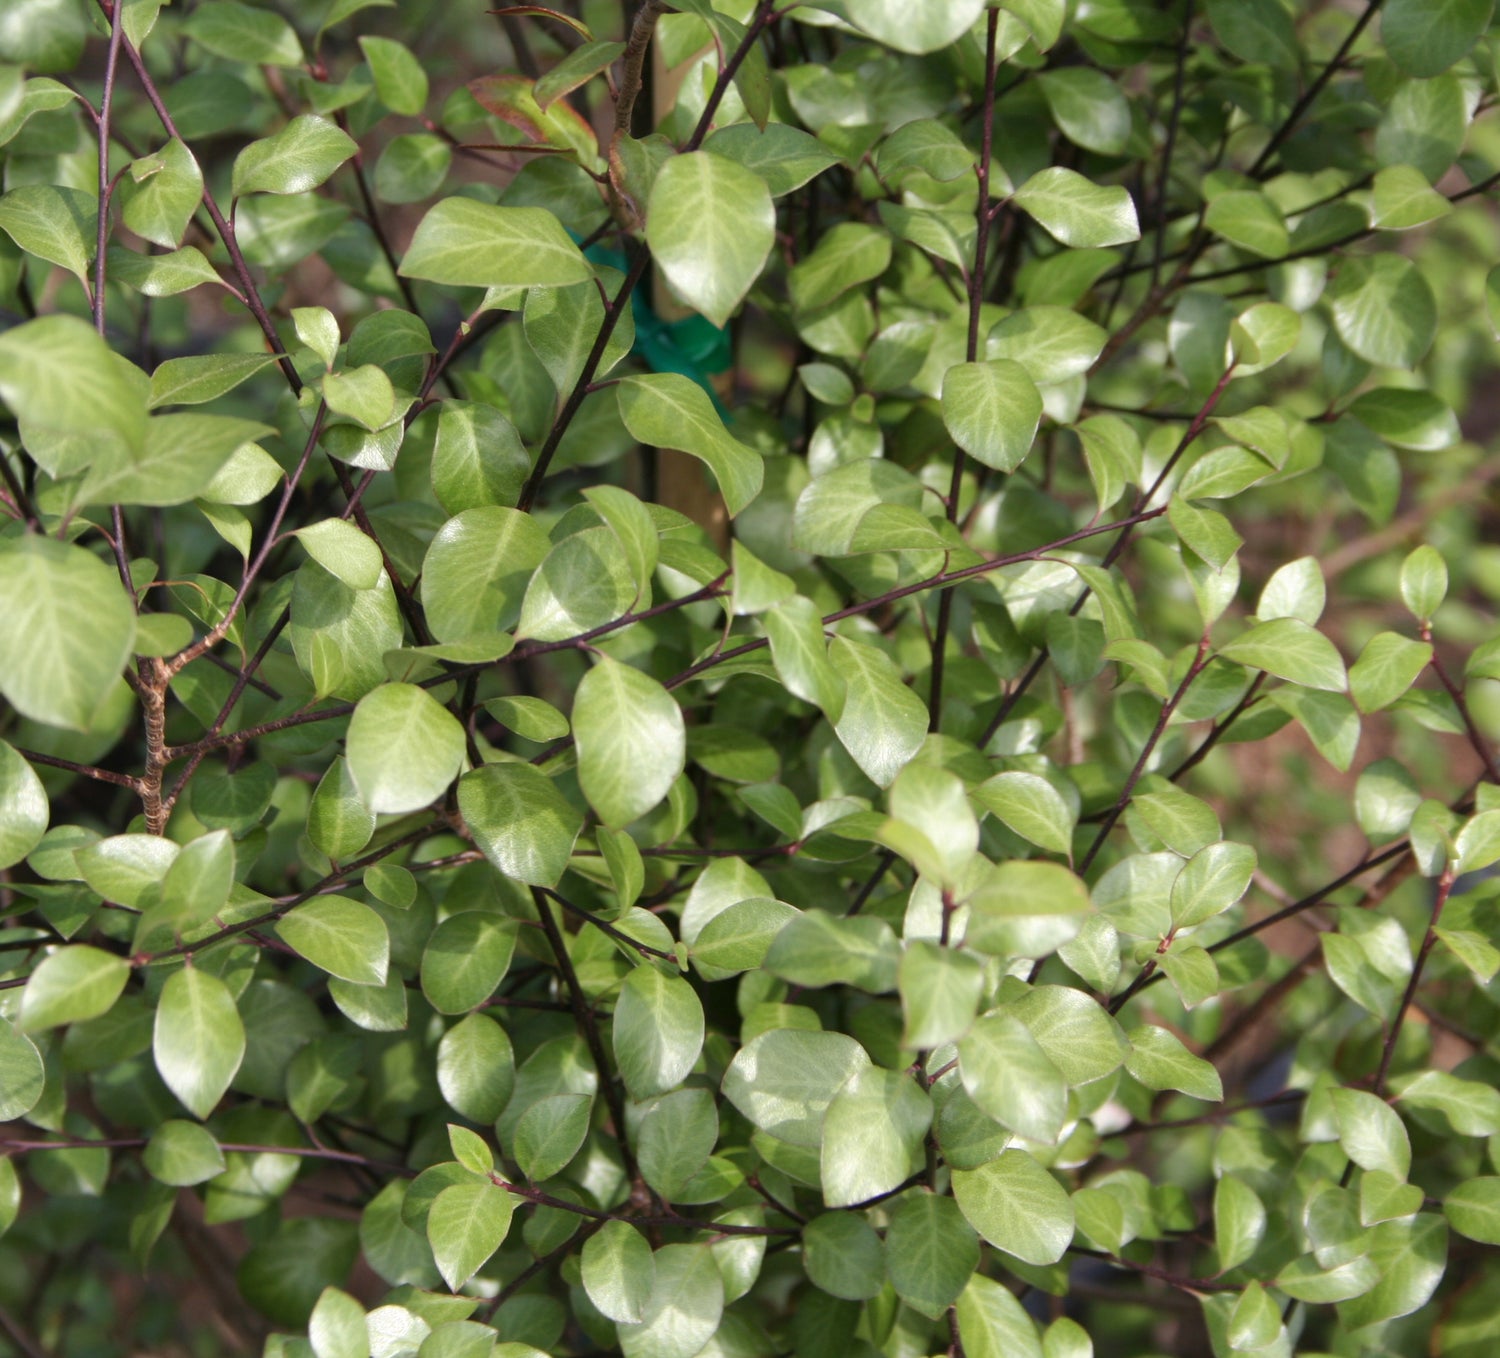 A close up of a green bush with leaves, identified as Pittosporum Silver Sheen.